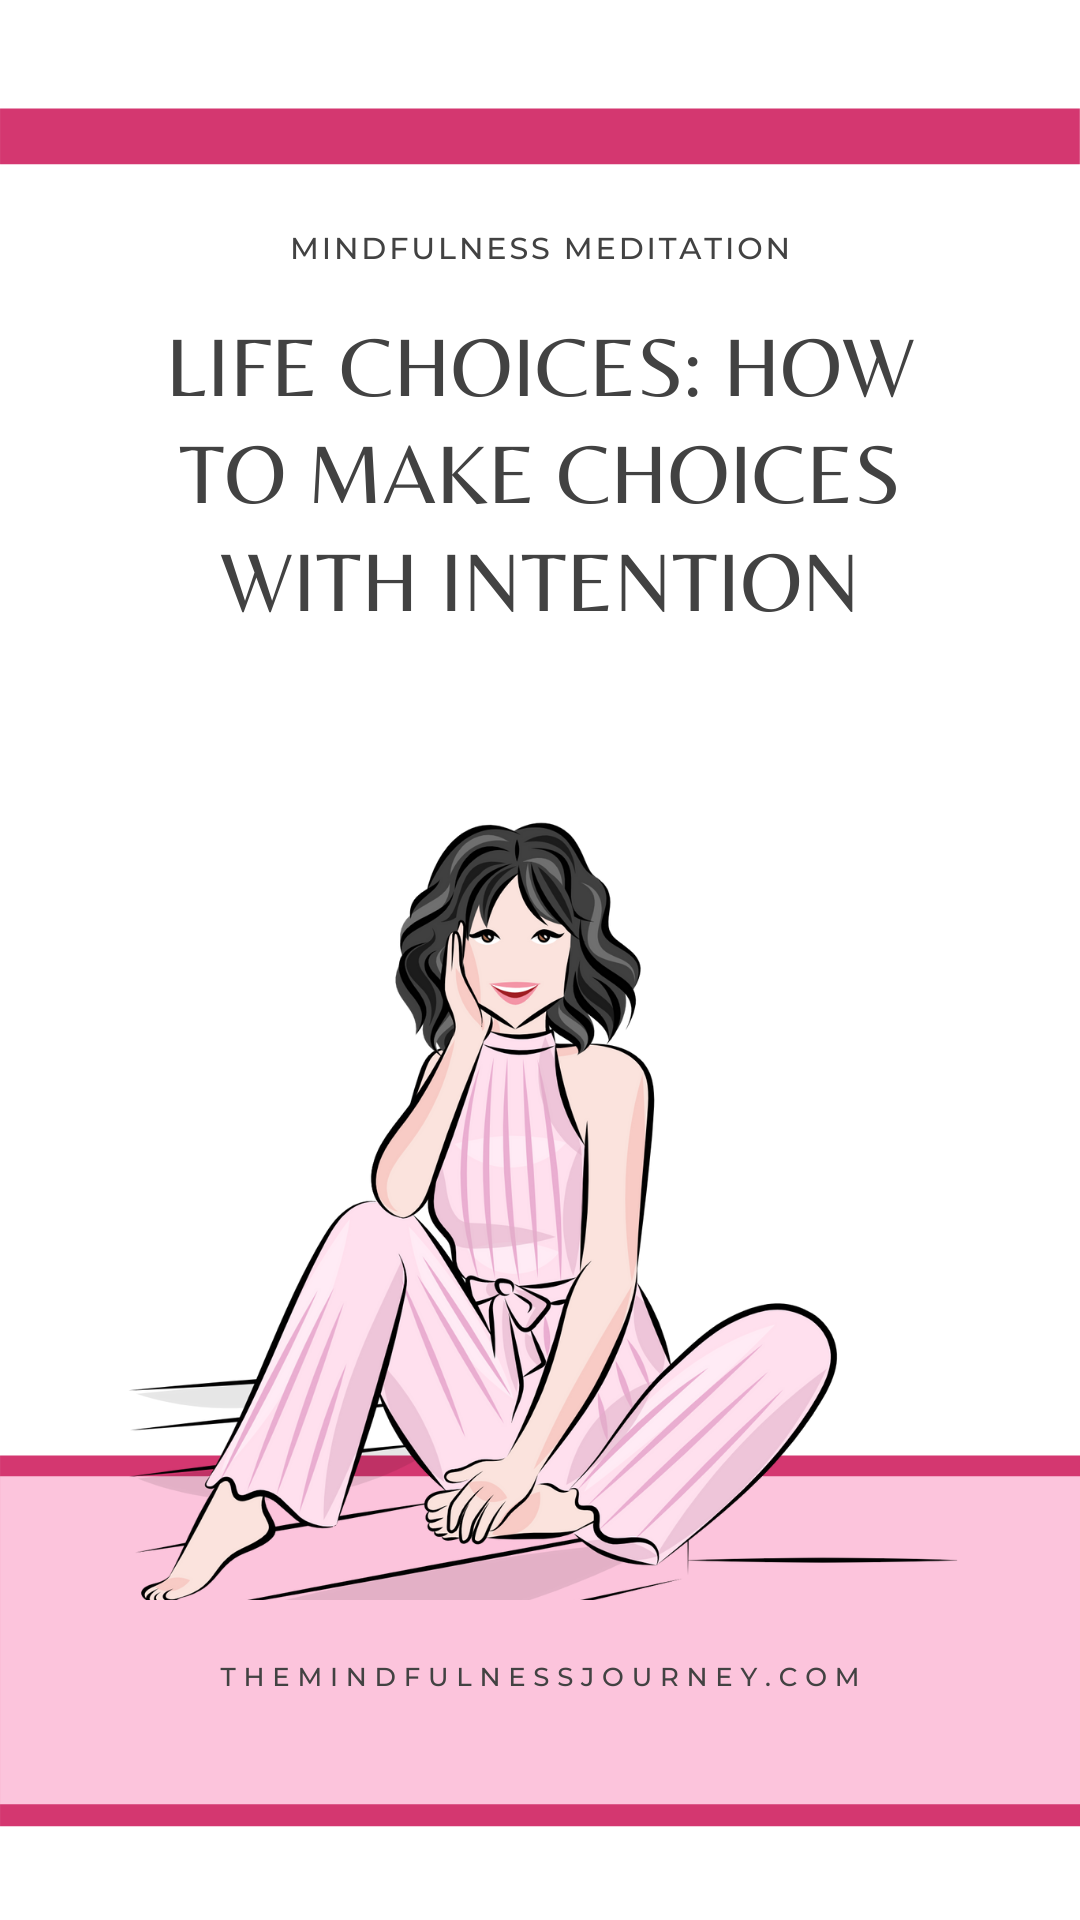 life choices - how to make choices with intention